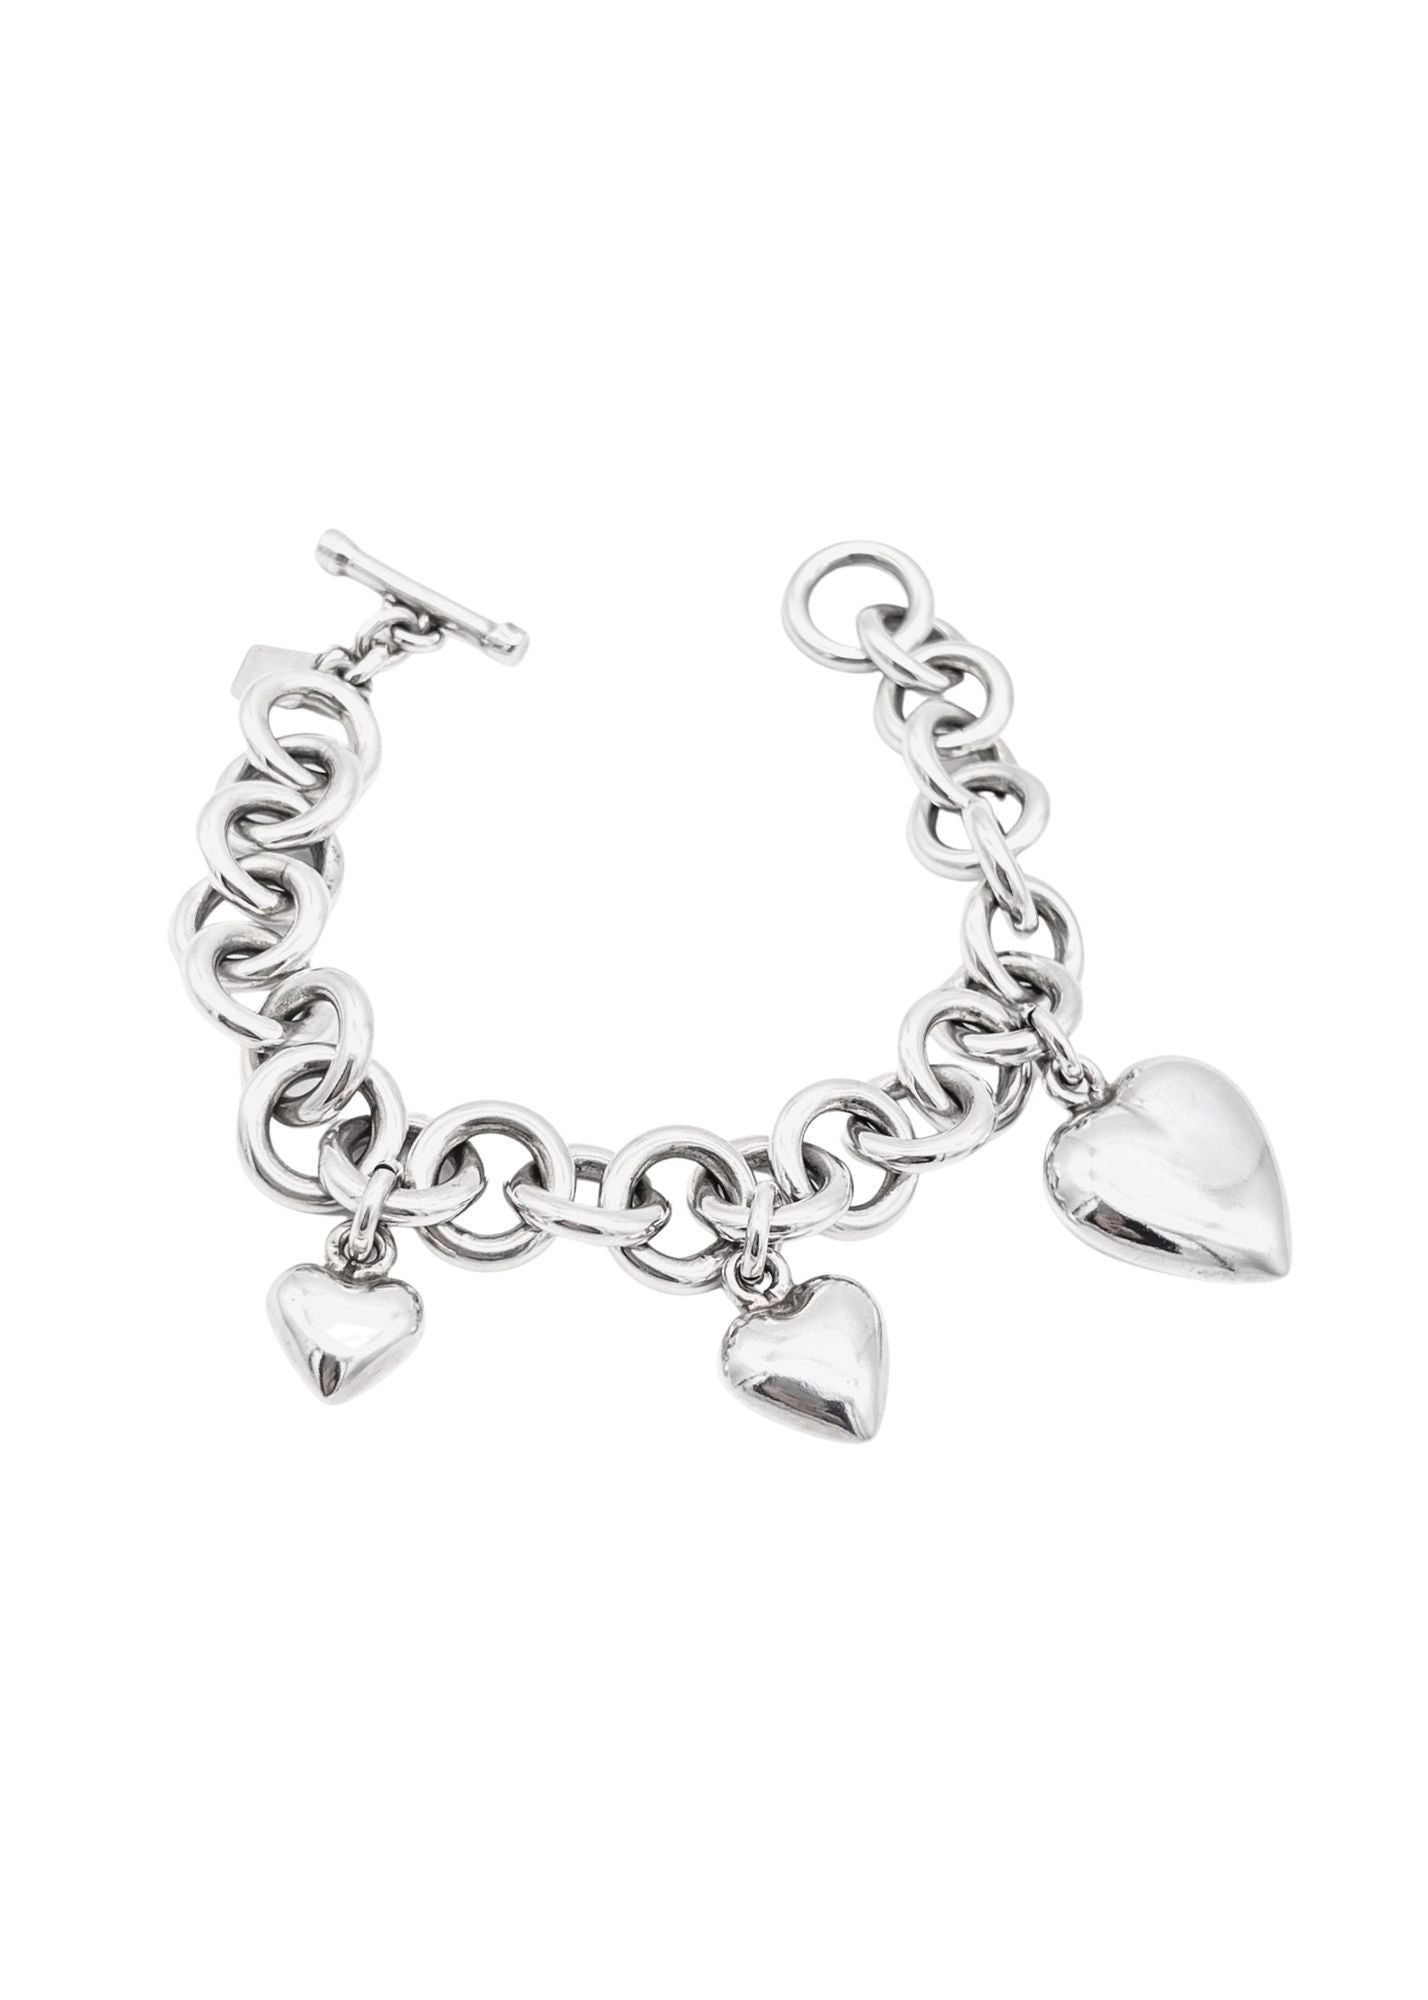 Oval Link Bracelet with Sterling Silver Heart Charms & Toggle